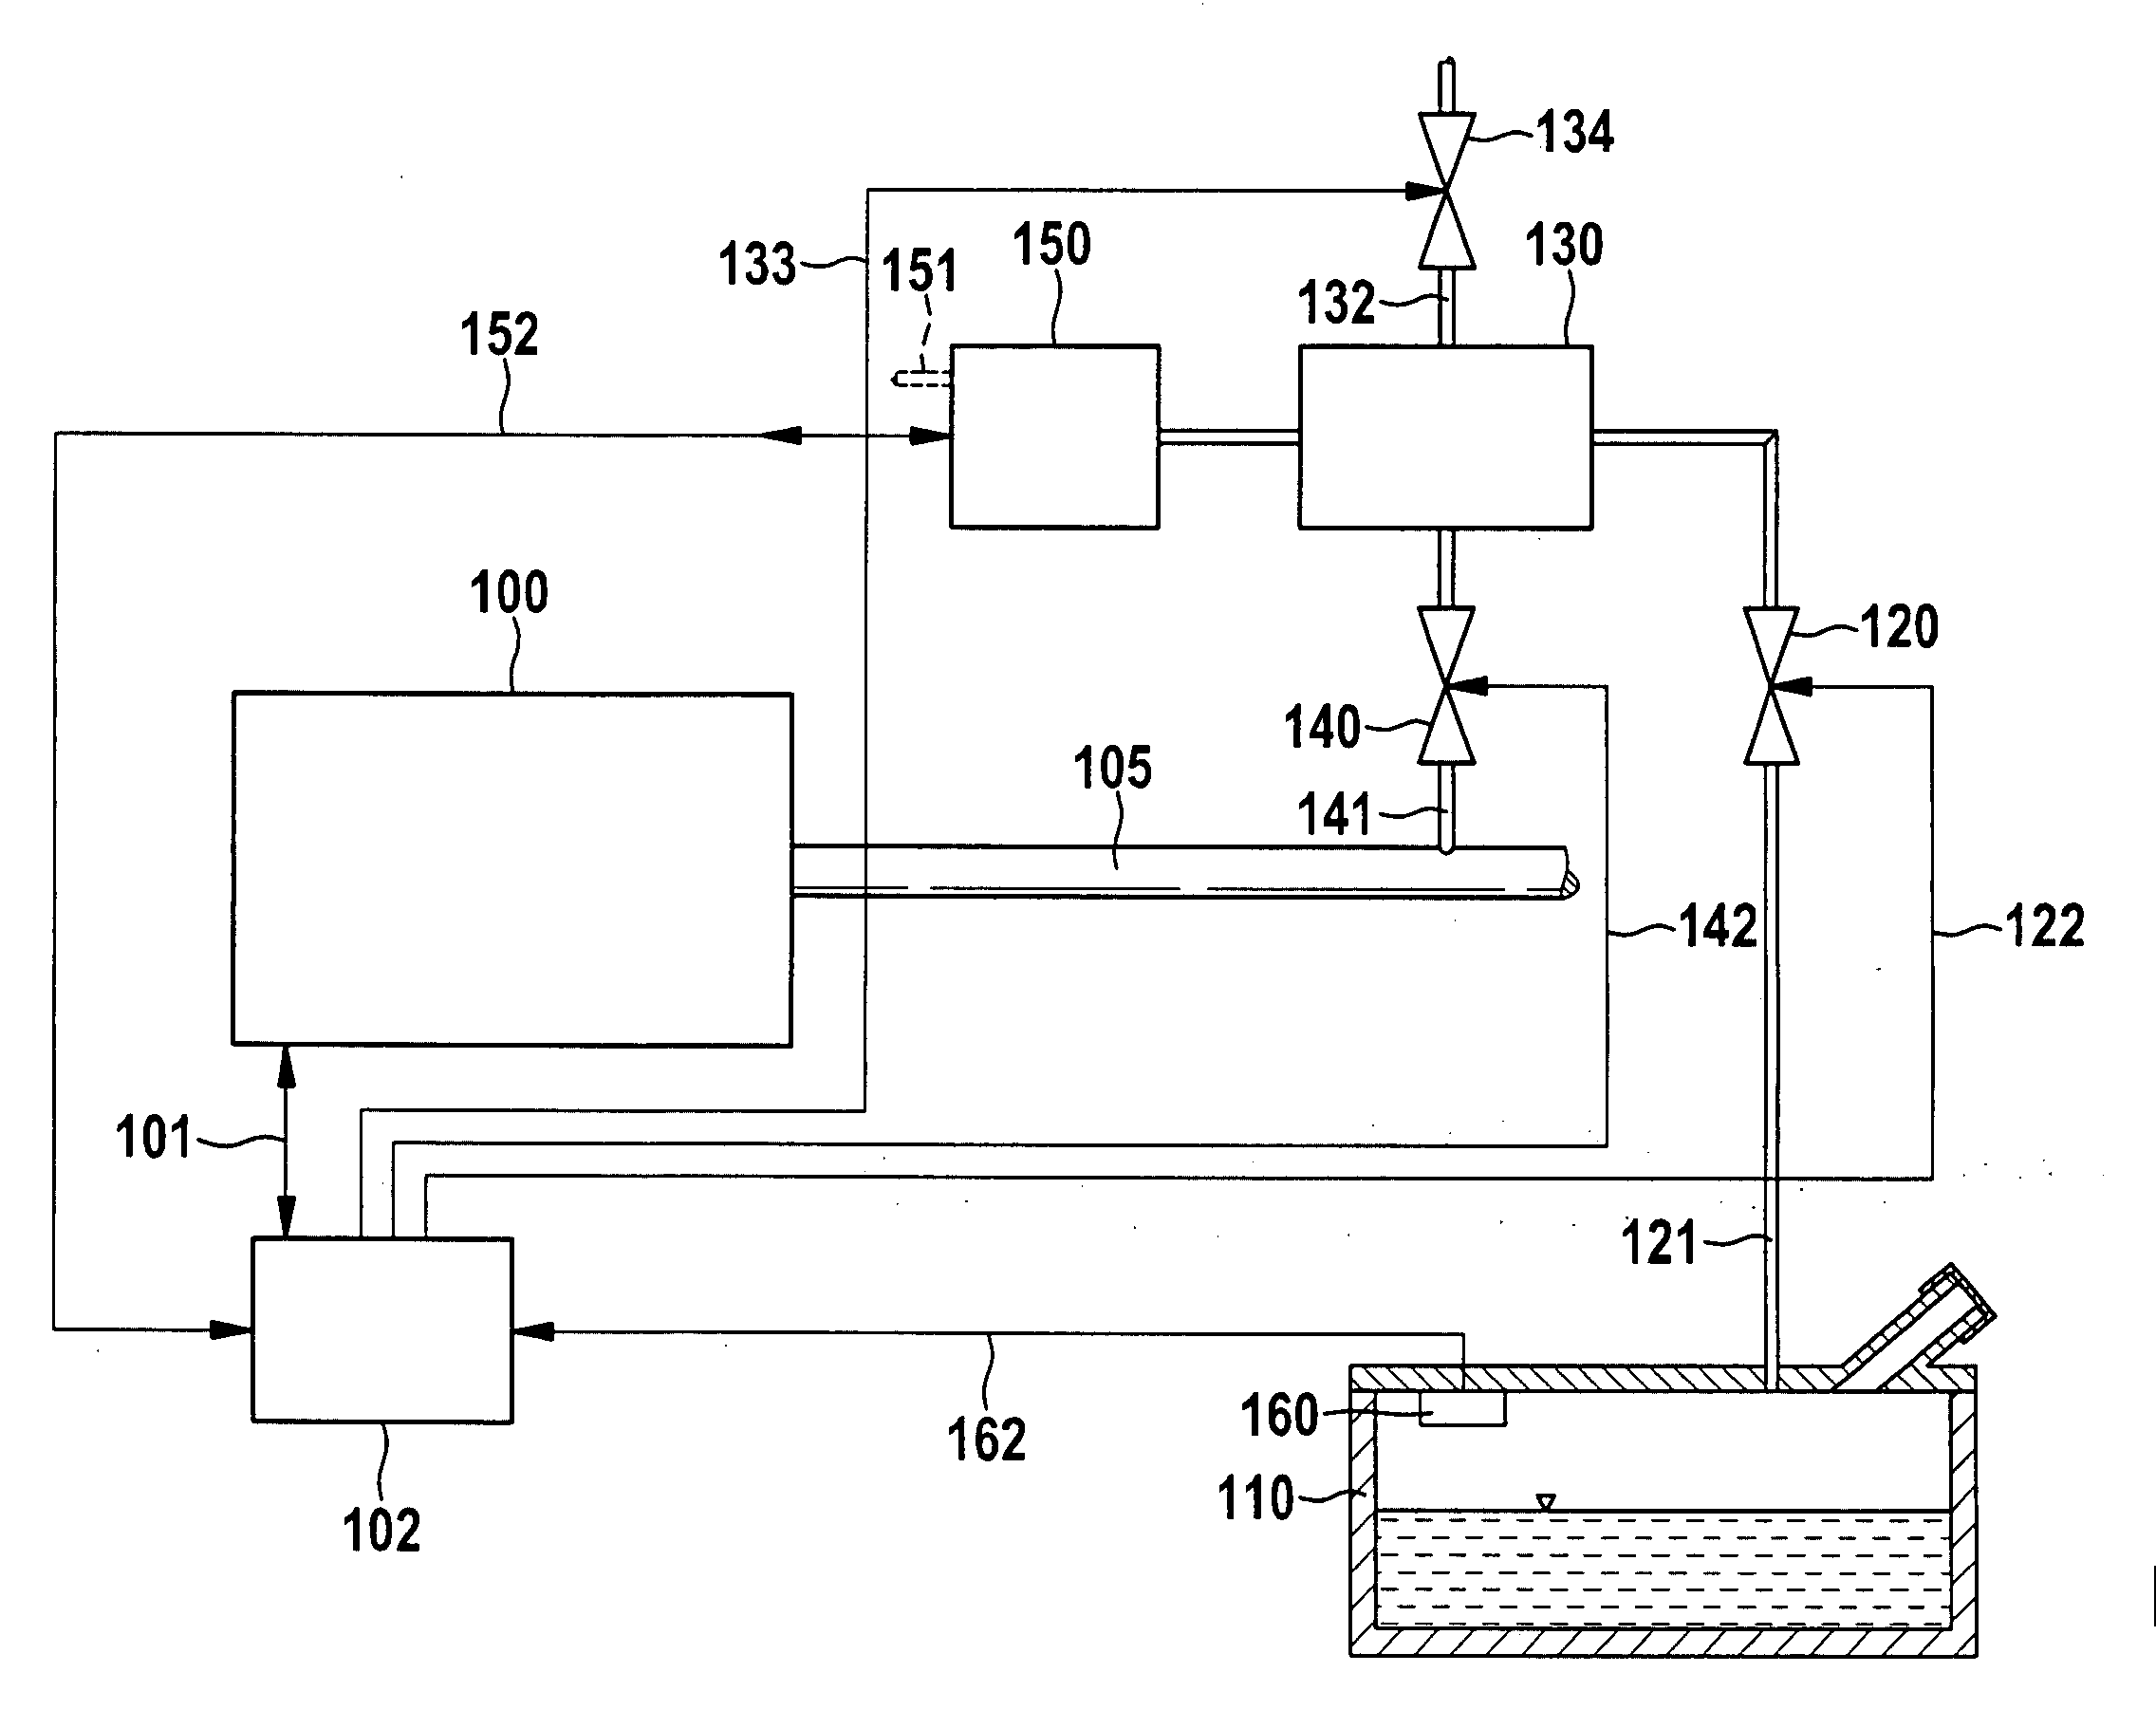 Method for testing the operability of a tank shutoff valve of a fuel tank system